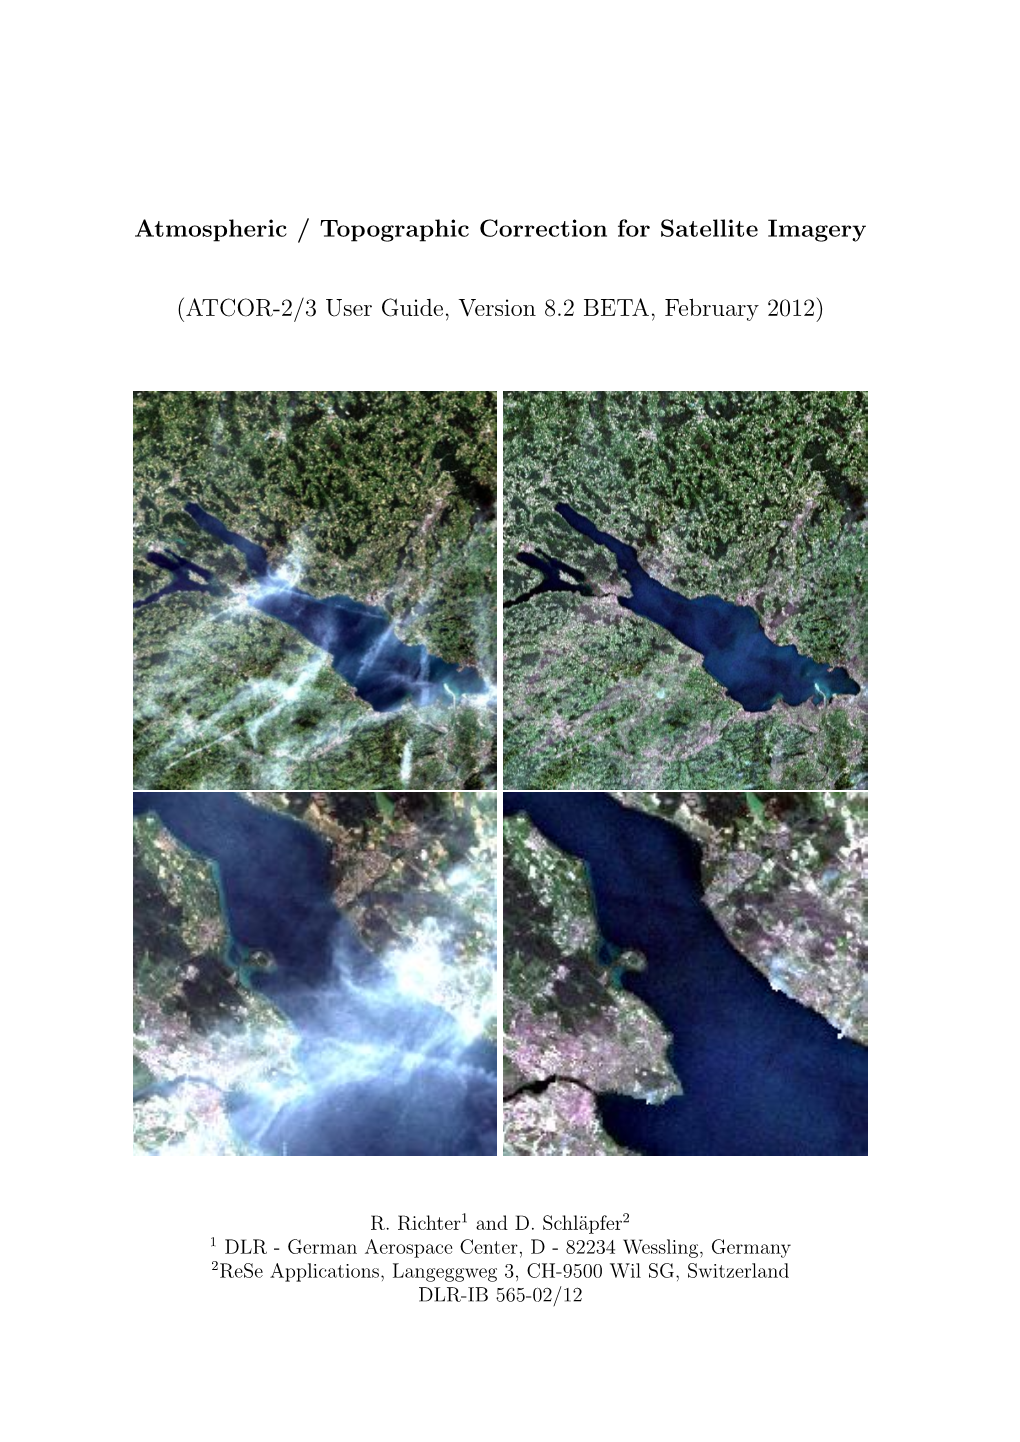 Atmospheric / Topographic Correction for Satellite Imagery (ATCOR-2/3